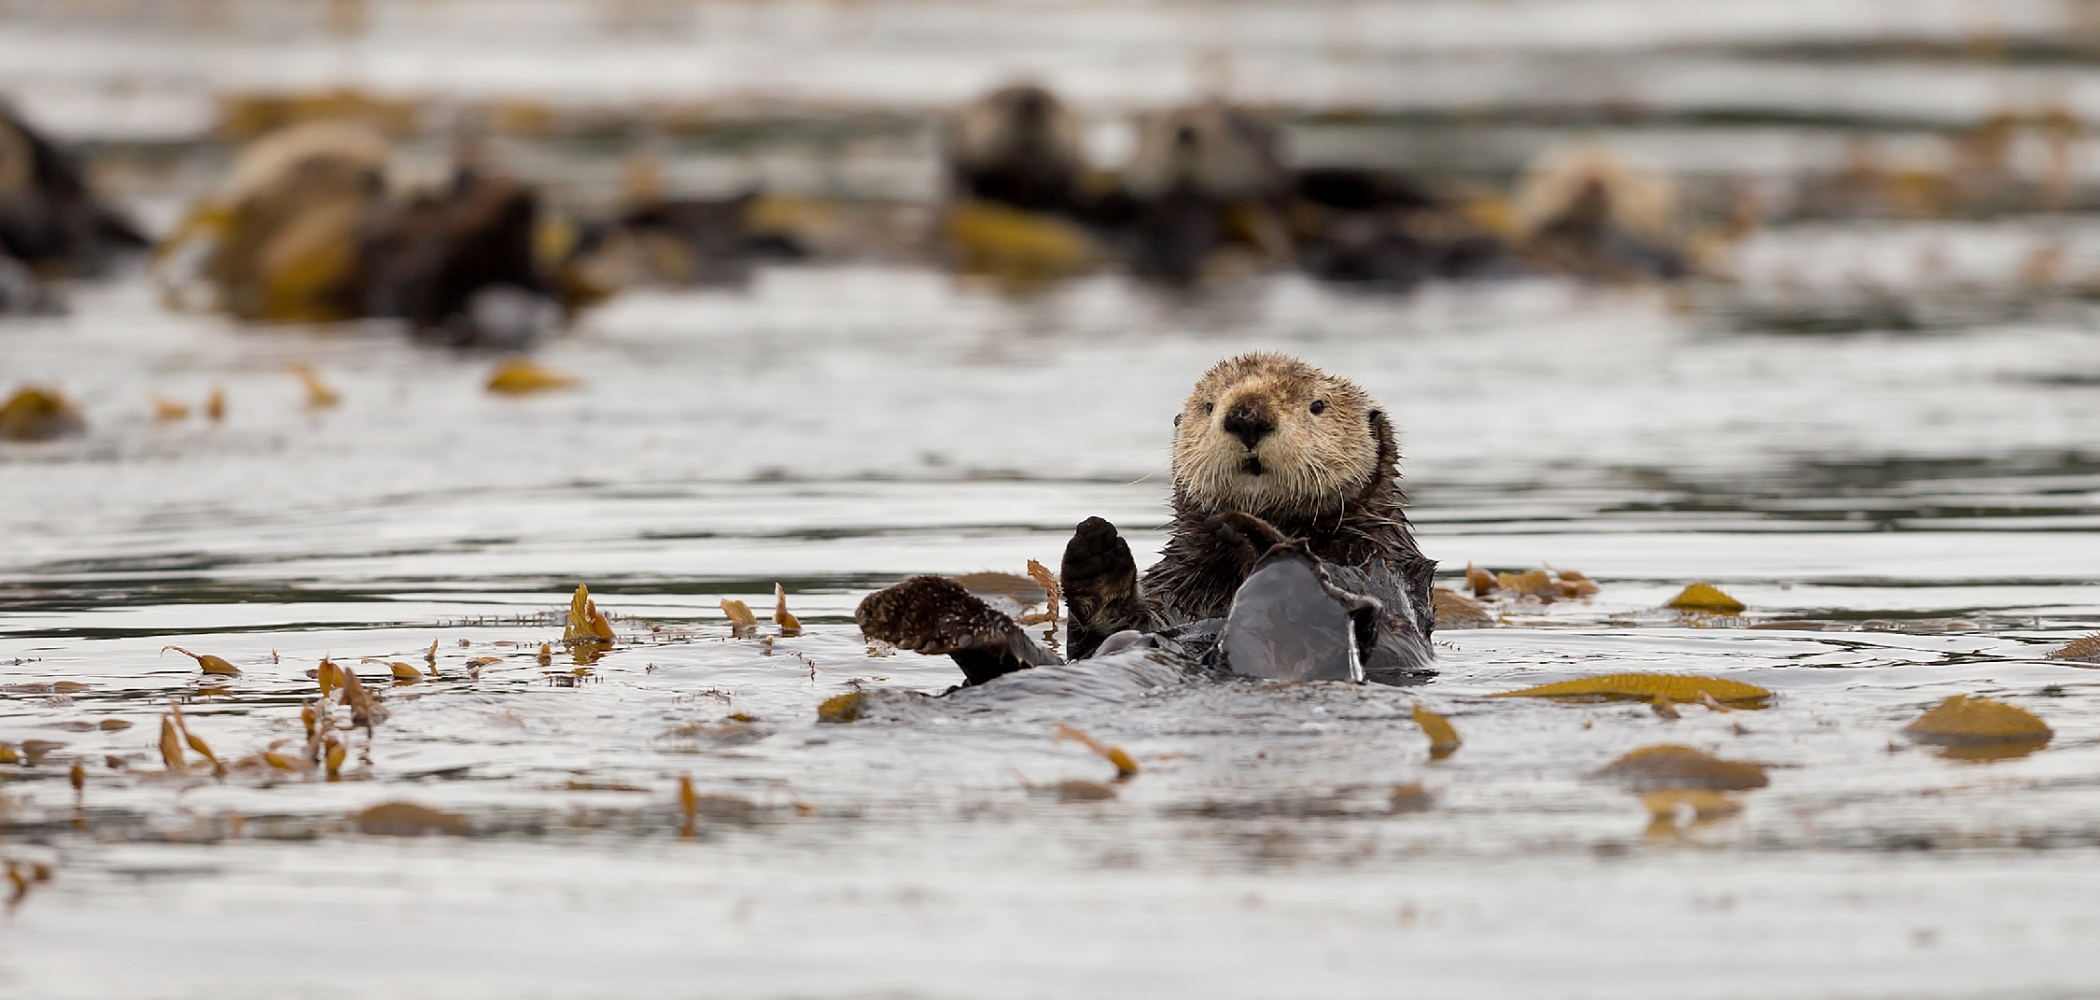 Sea Otter near Spring Island by Kyuquot Sound